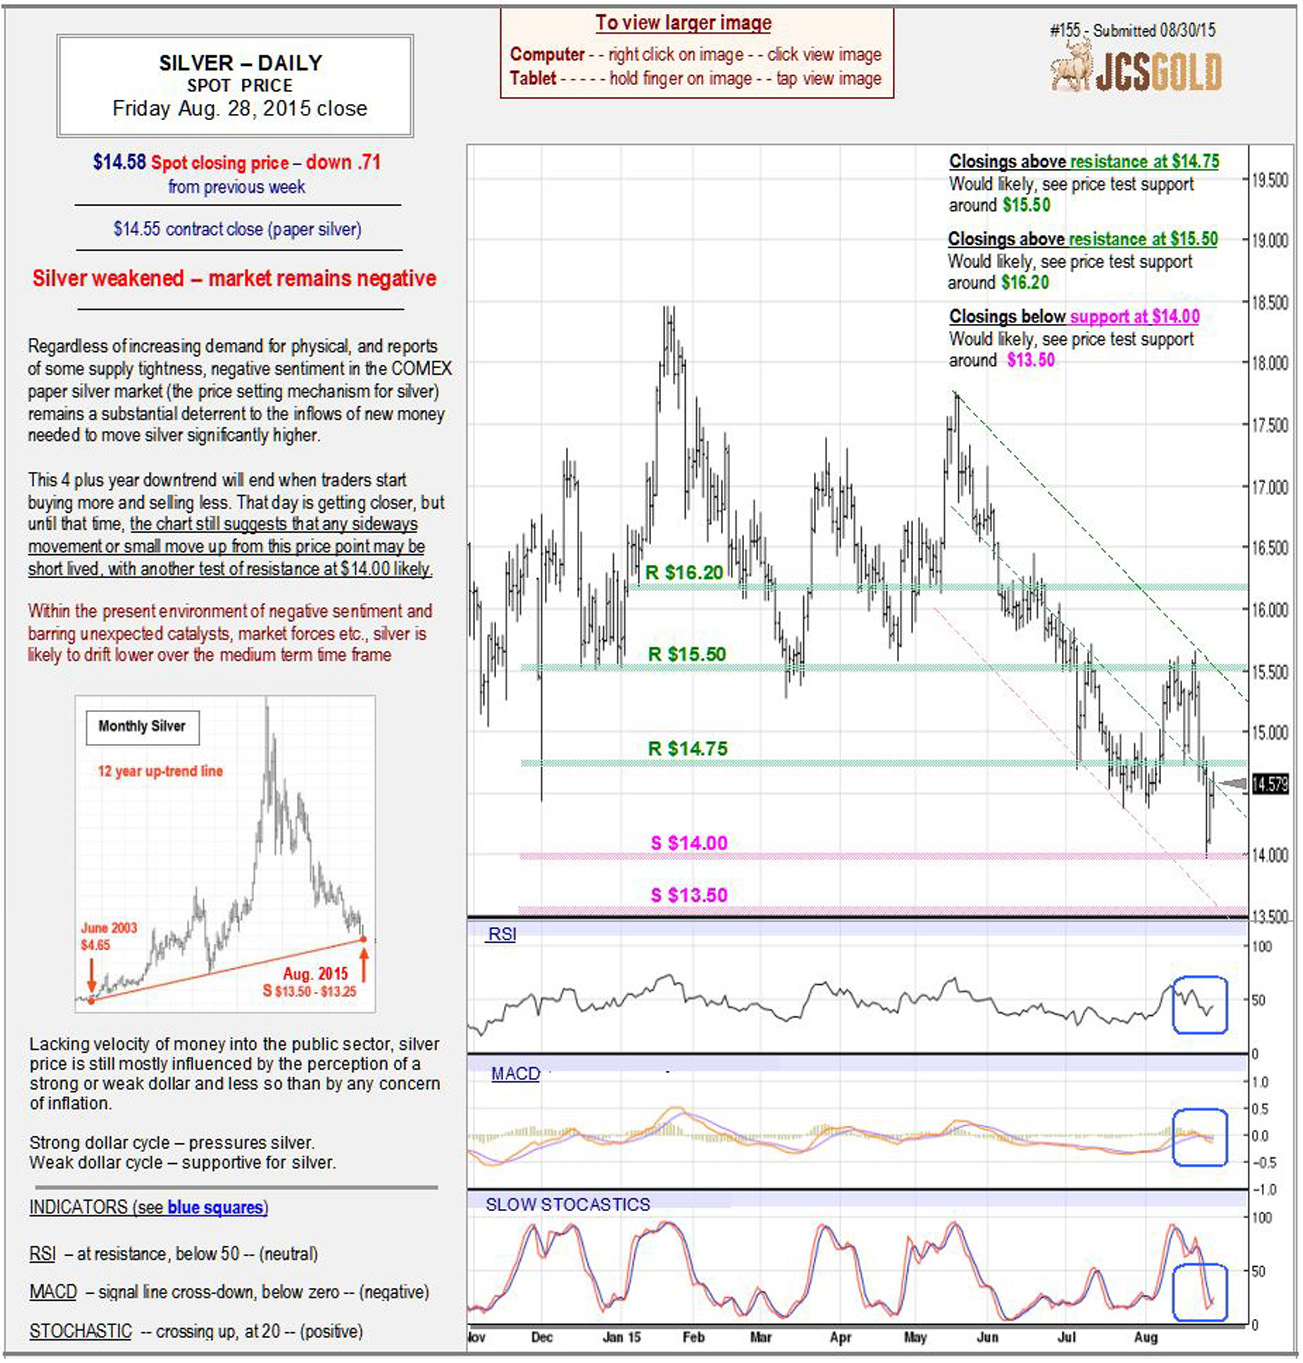 Aug 28, 2015 chart & commentary